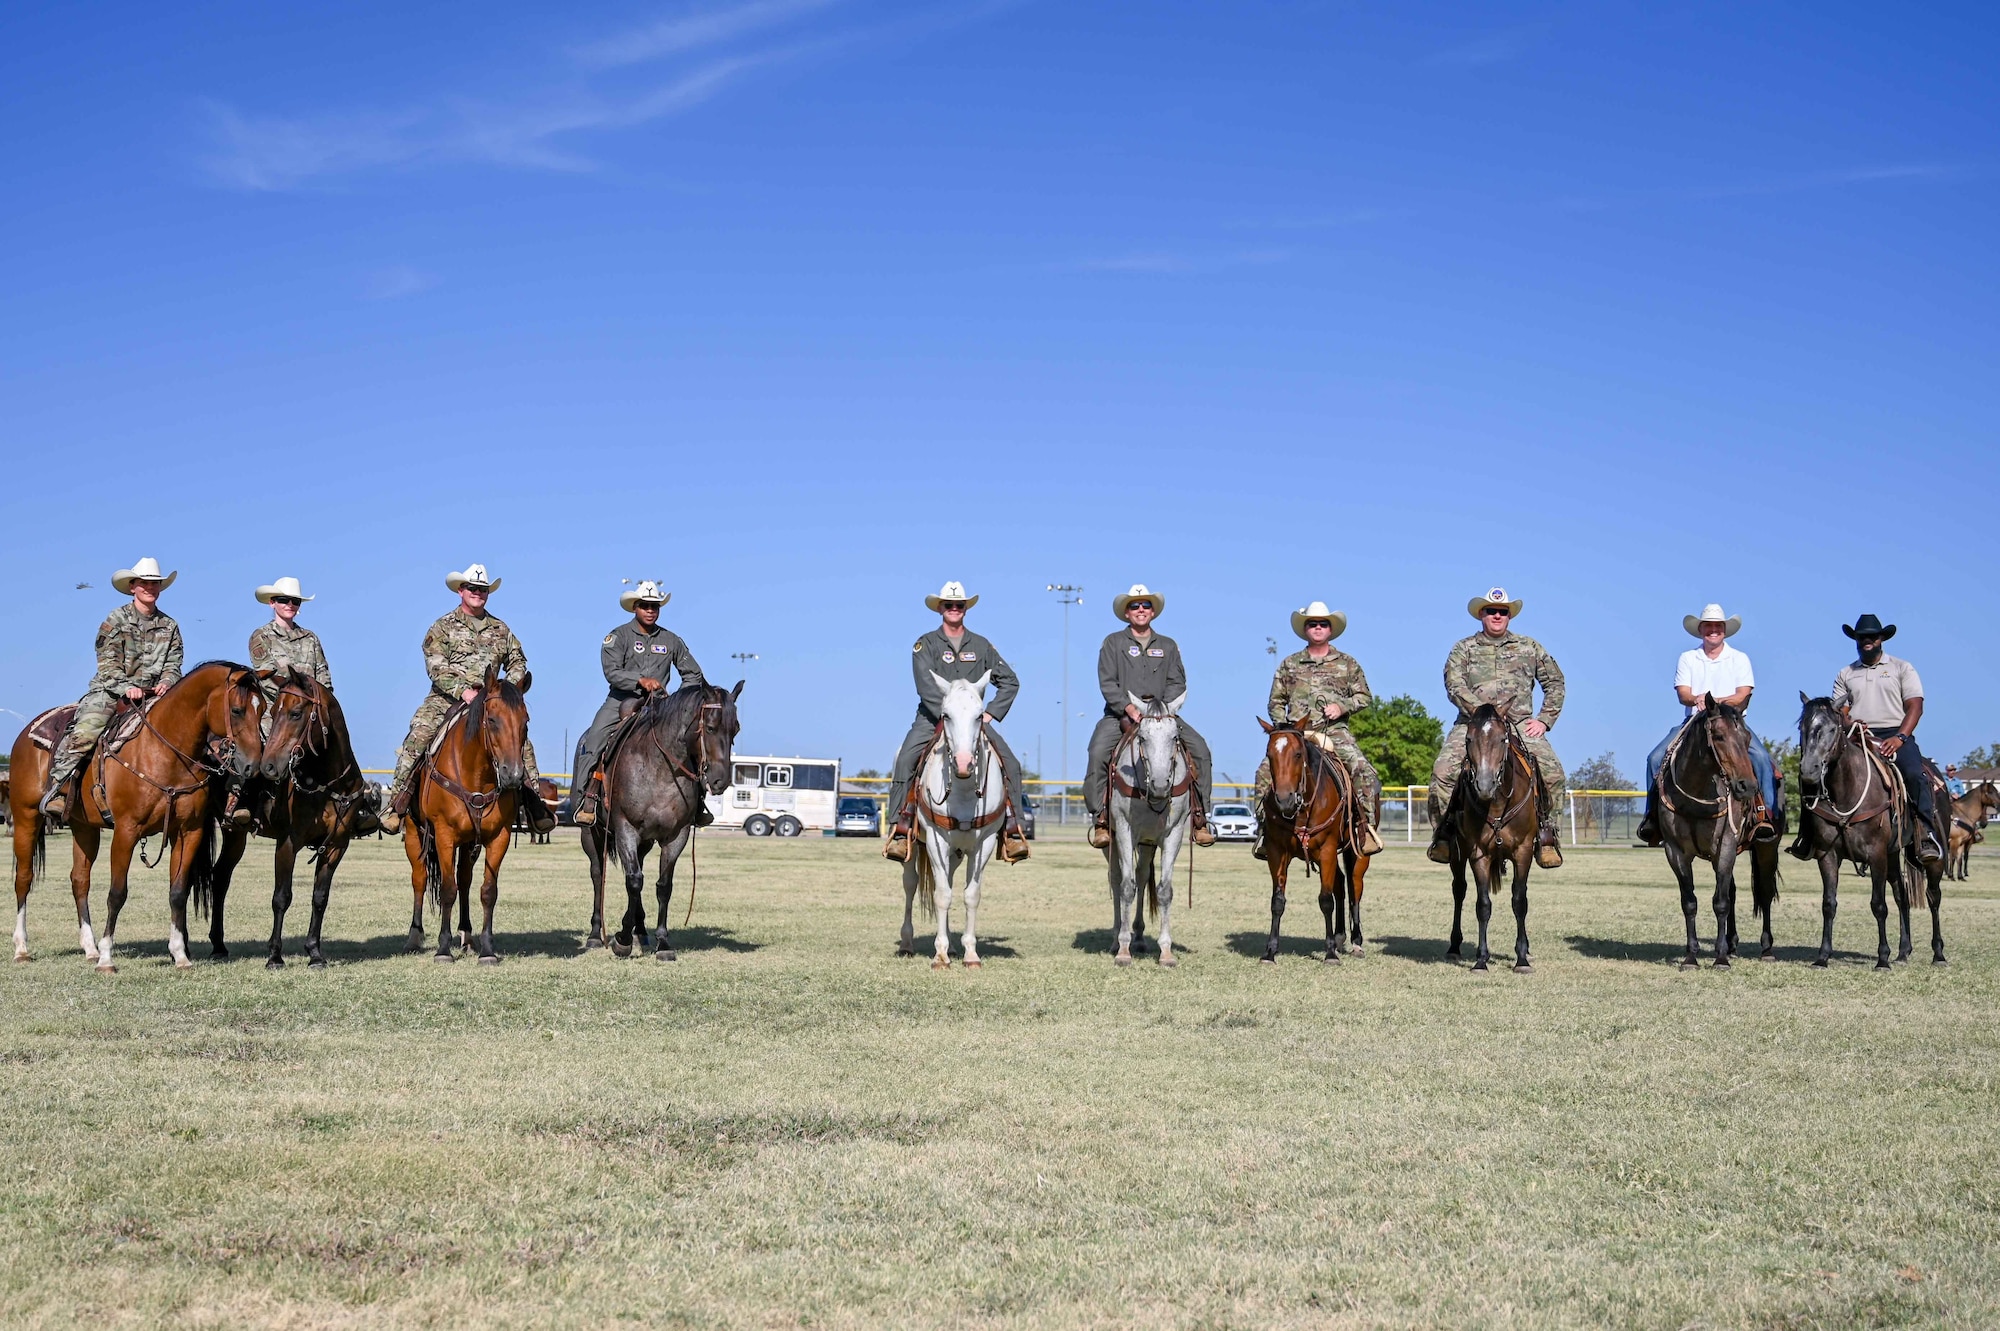 Leaders from the 97th Air Mobility Wing pose for a photo during the 25th Annual Cattle Drive at Altus Air Force Base (AFB), Oklahoma, Aug. 24, 2023. The command team, group commanders and command chiefs rode alongside local ranchers and dozens of longhorn cattle throughout Altus AFB. (U.S. Air Force photo by Airman 1st Class Kari Degraffenreed)